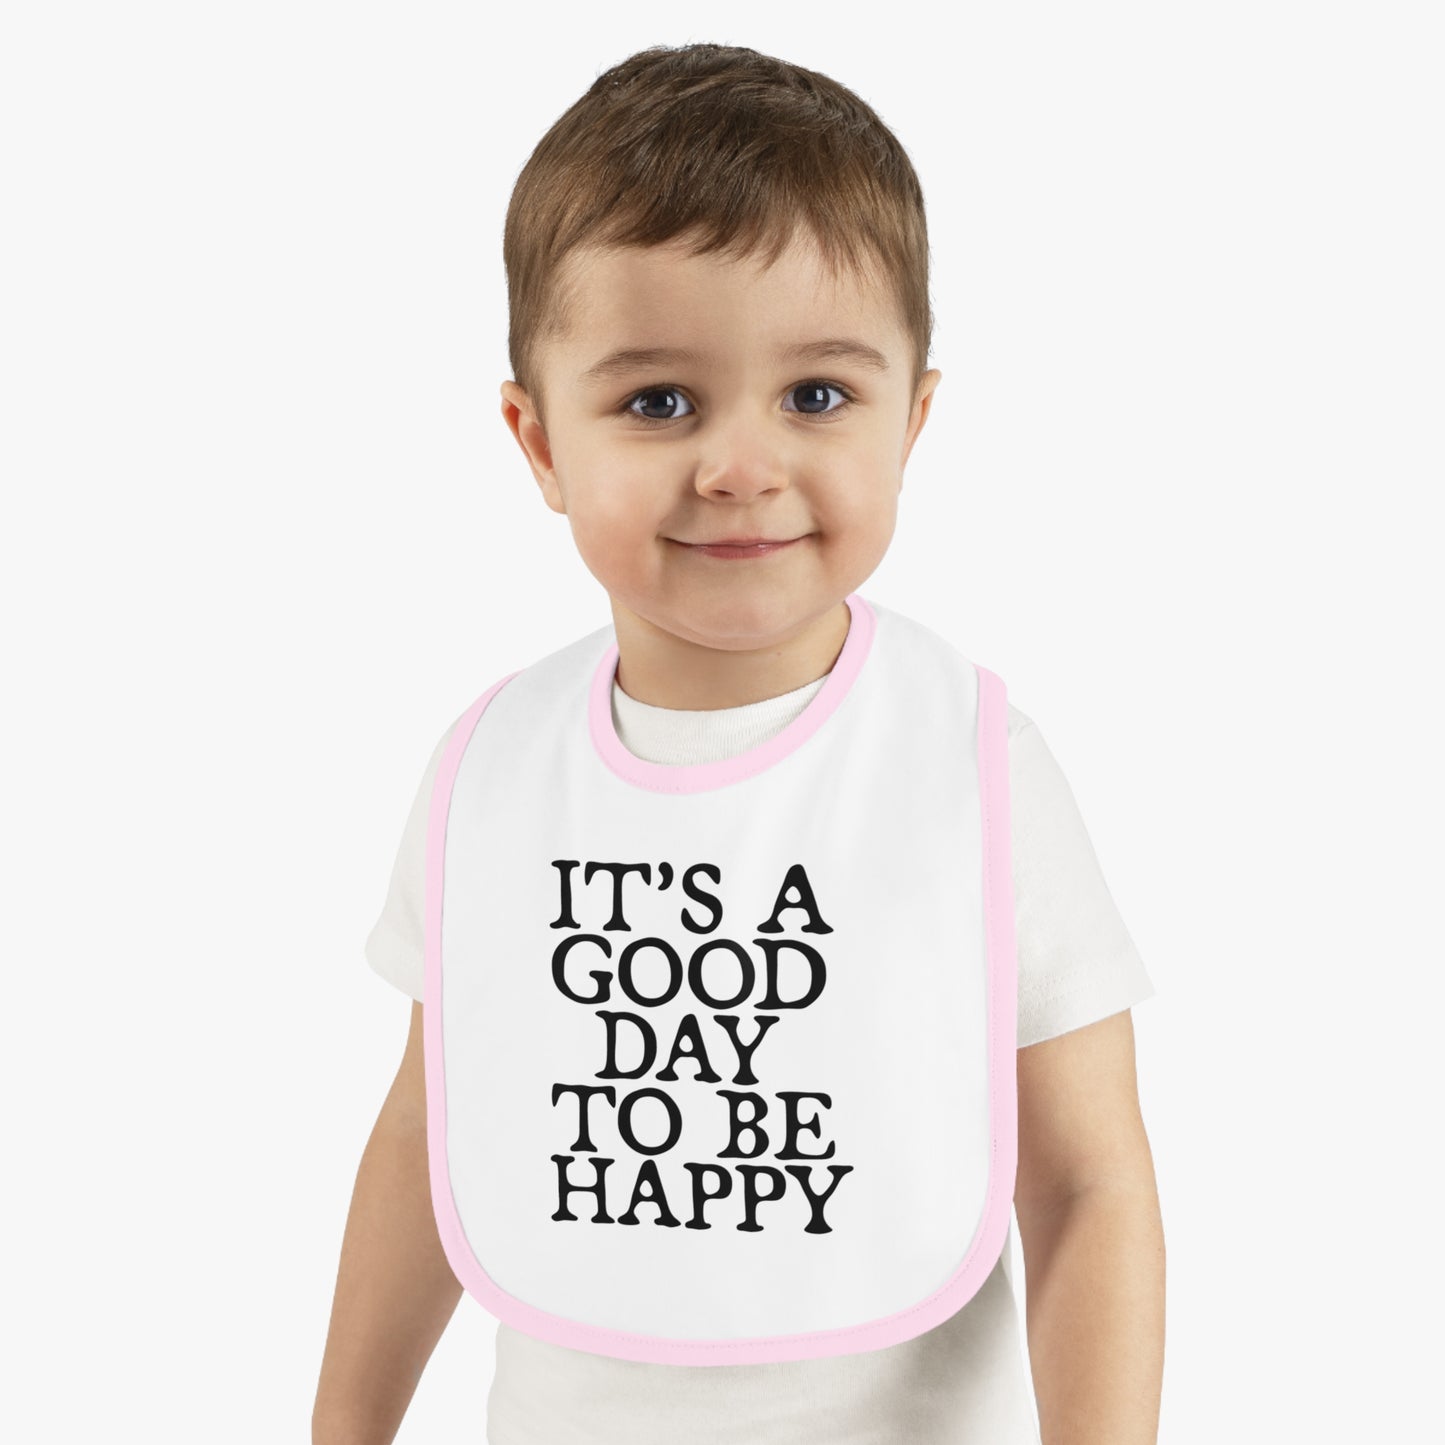 It's a Good Day to be Happy - Baby Contrast Trim Jersey Bib